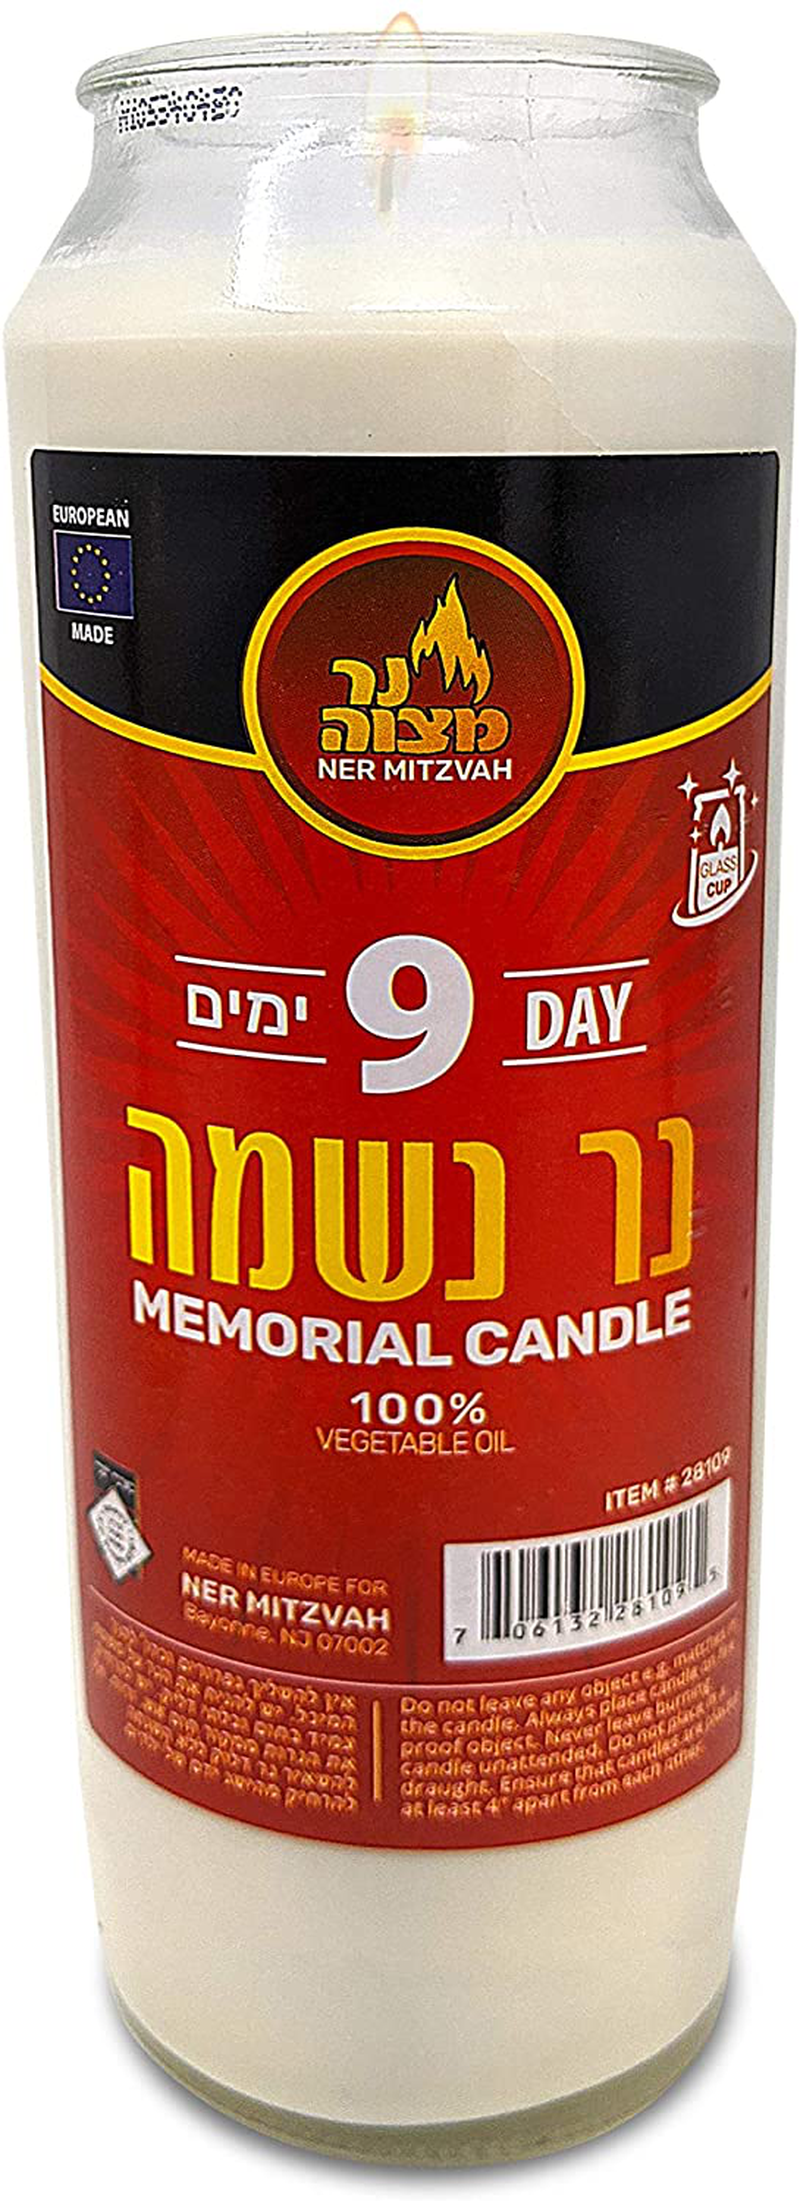 Ner Mitzvah 9 Day Yahrzeit Candle - 3 Pack Kosher White Yahrzeit Memorial Candles - Yom Kippur and Holiday Candle in Glass Jar - 100% Vegetable Oil Wax Prayer Candle Home & Garden > Decor > Home Fragrances > Candles Ner Mitzvah 1  